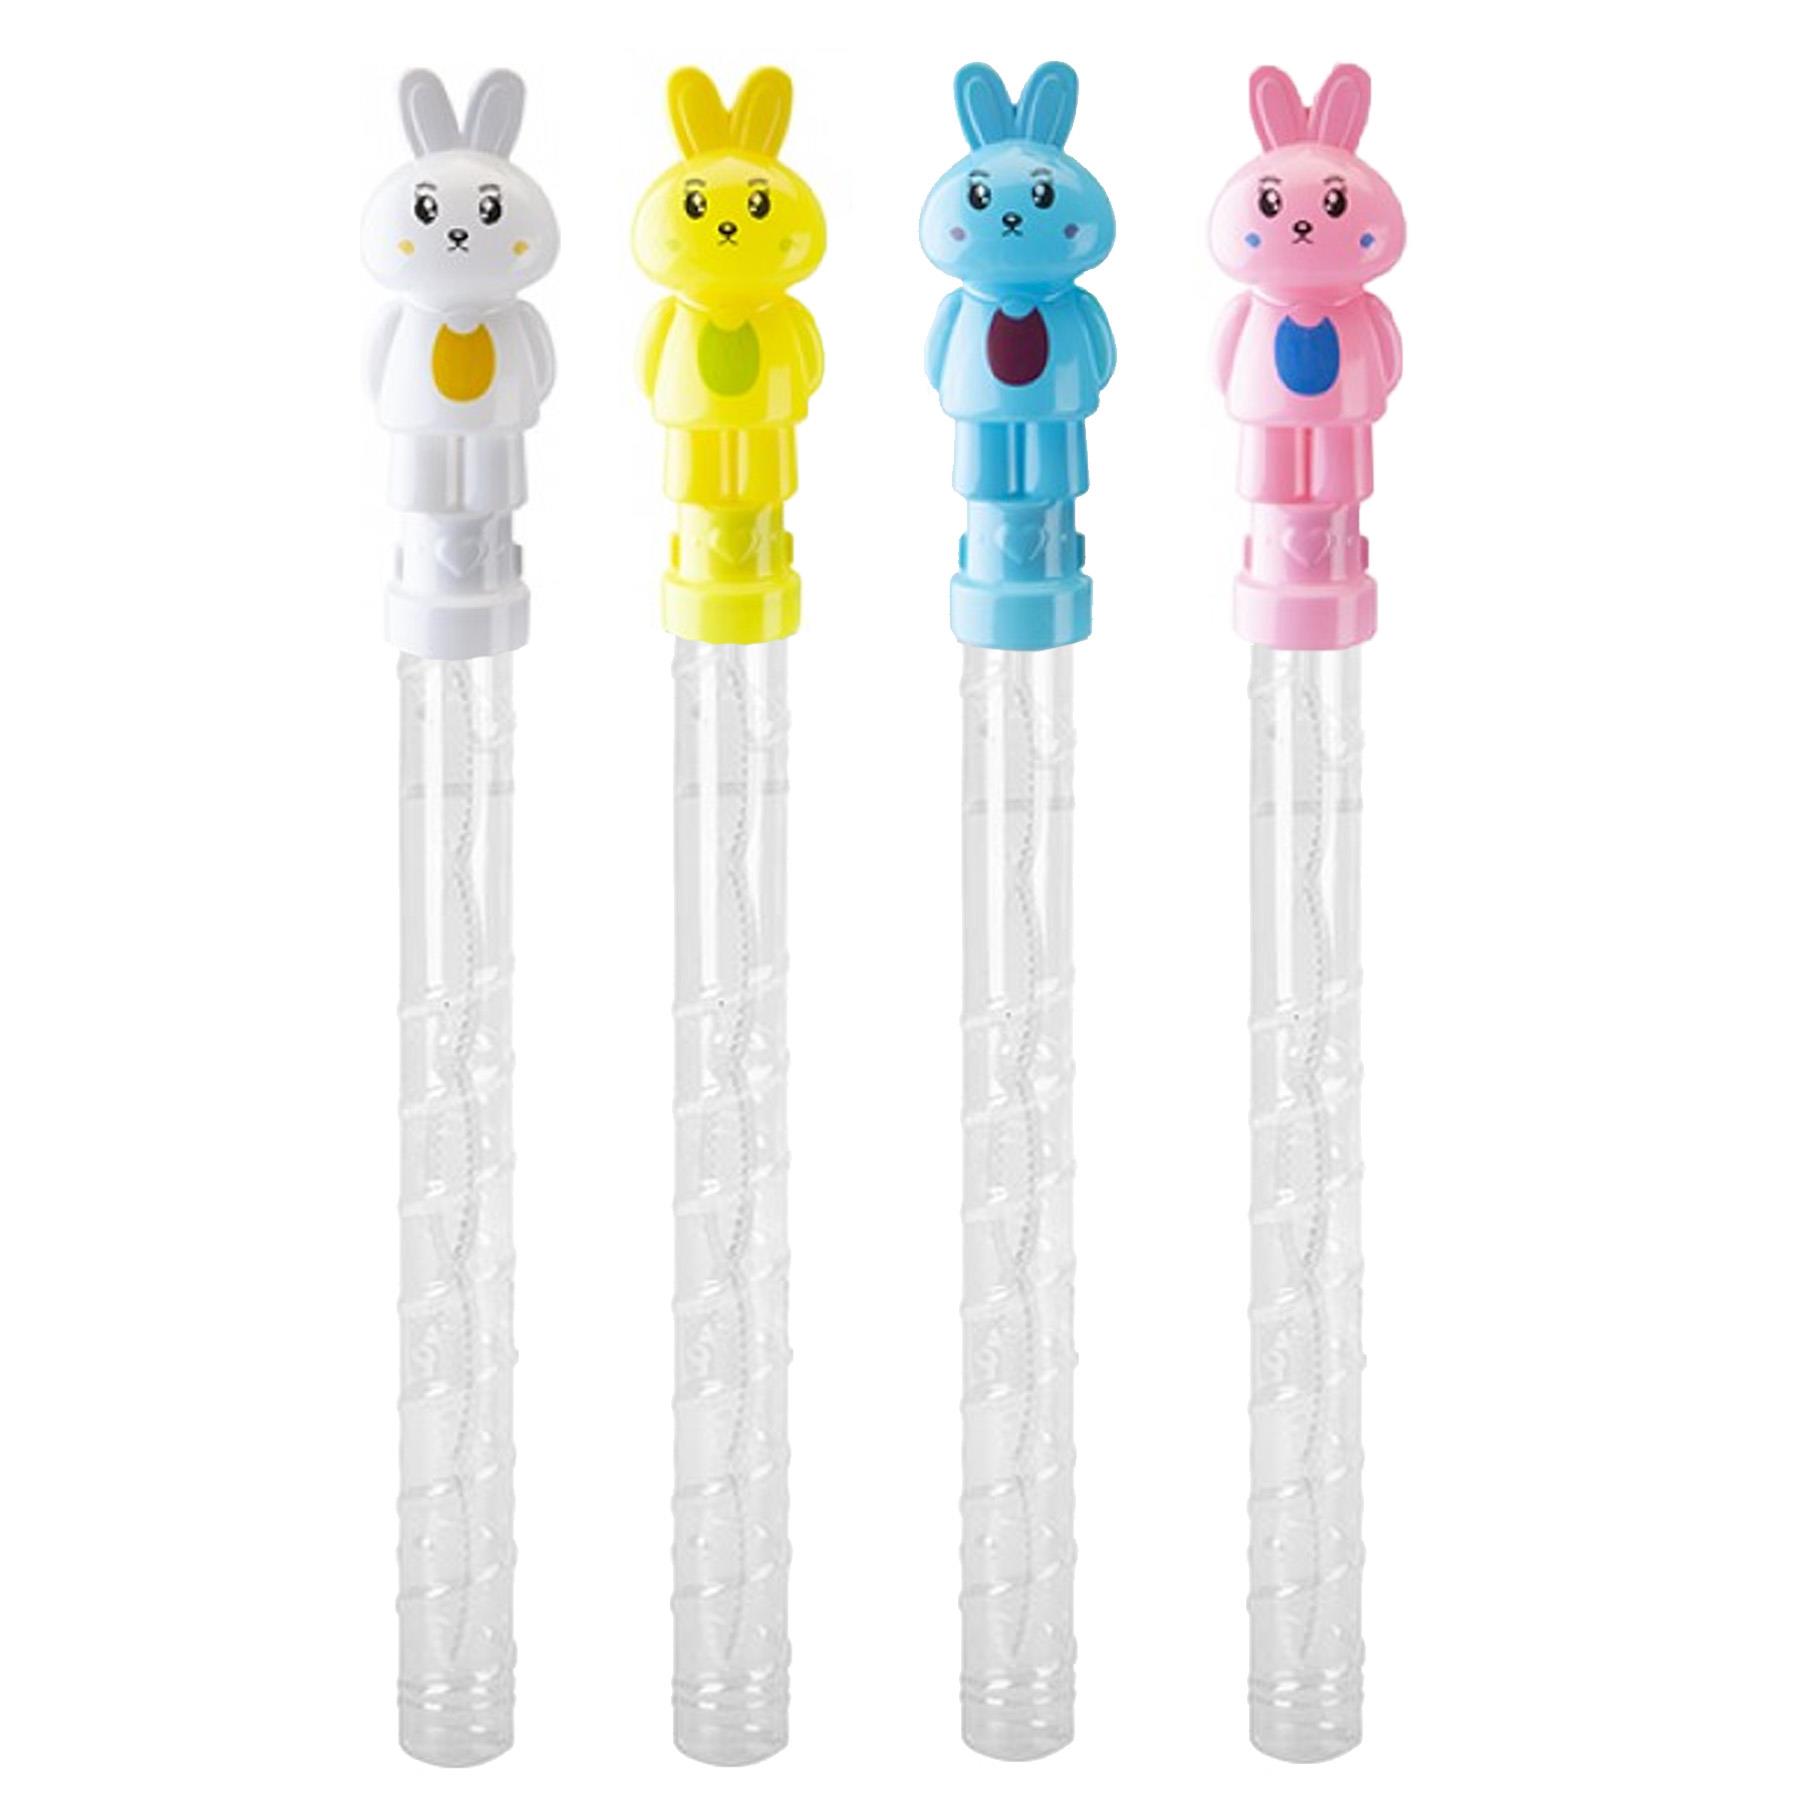 Easter Egg Hunt Accessories and Games - Bunny Bubble Wand Set of 4